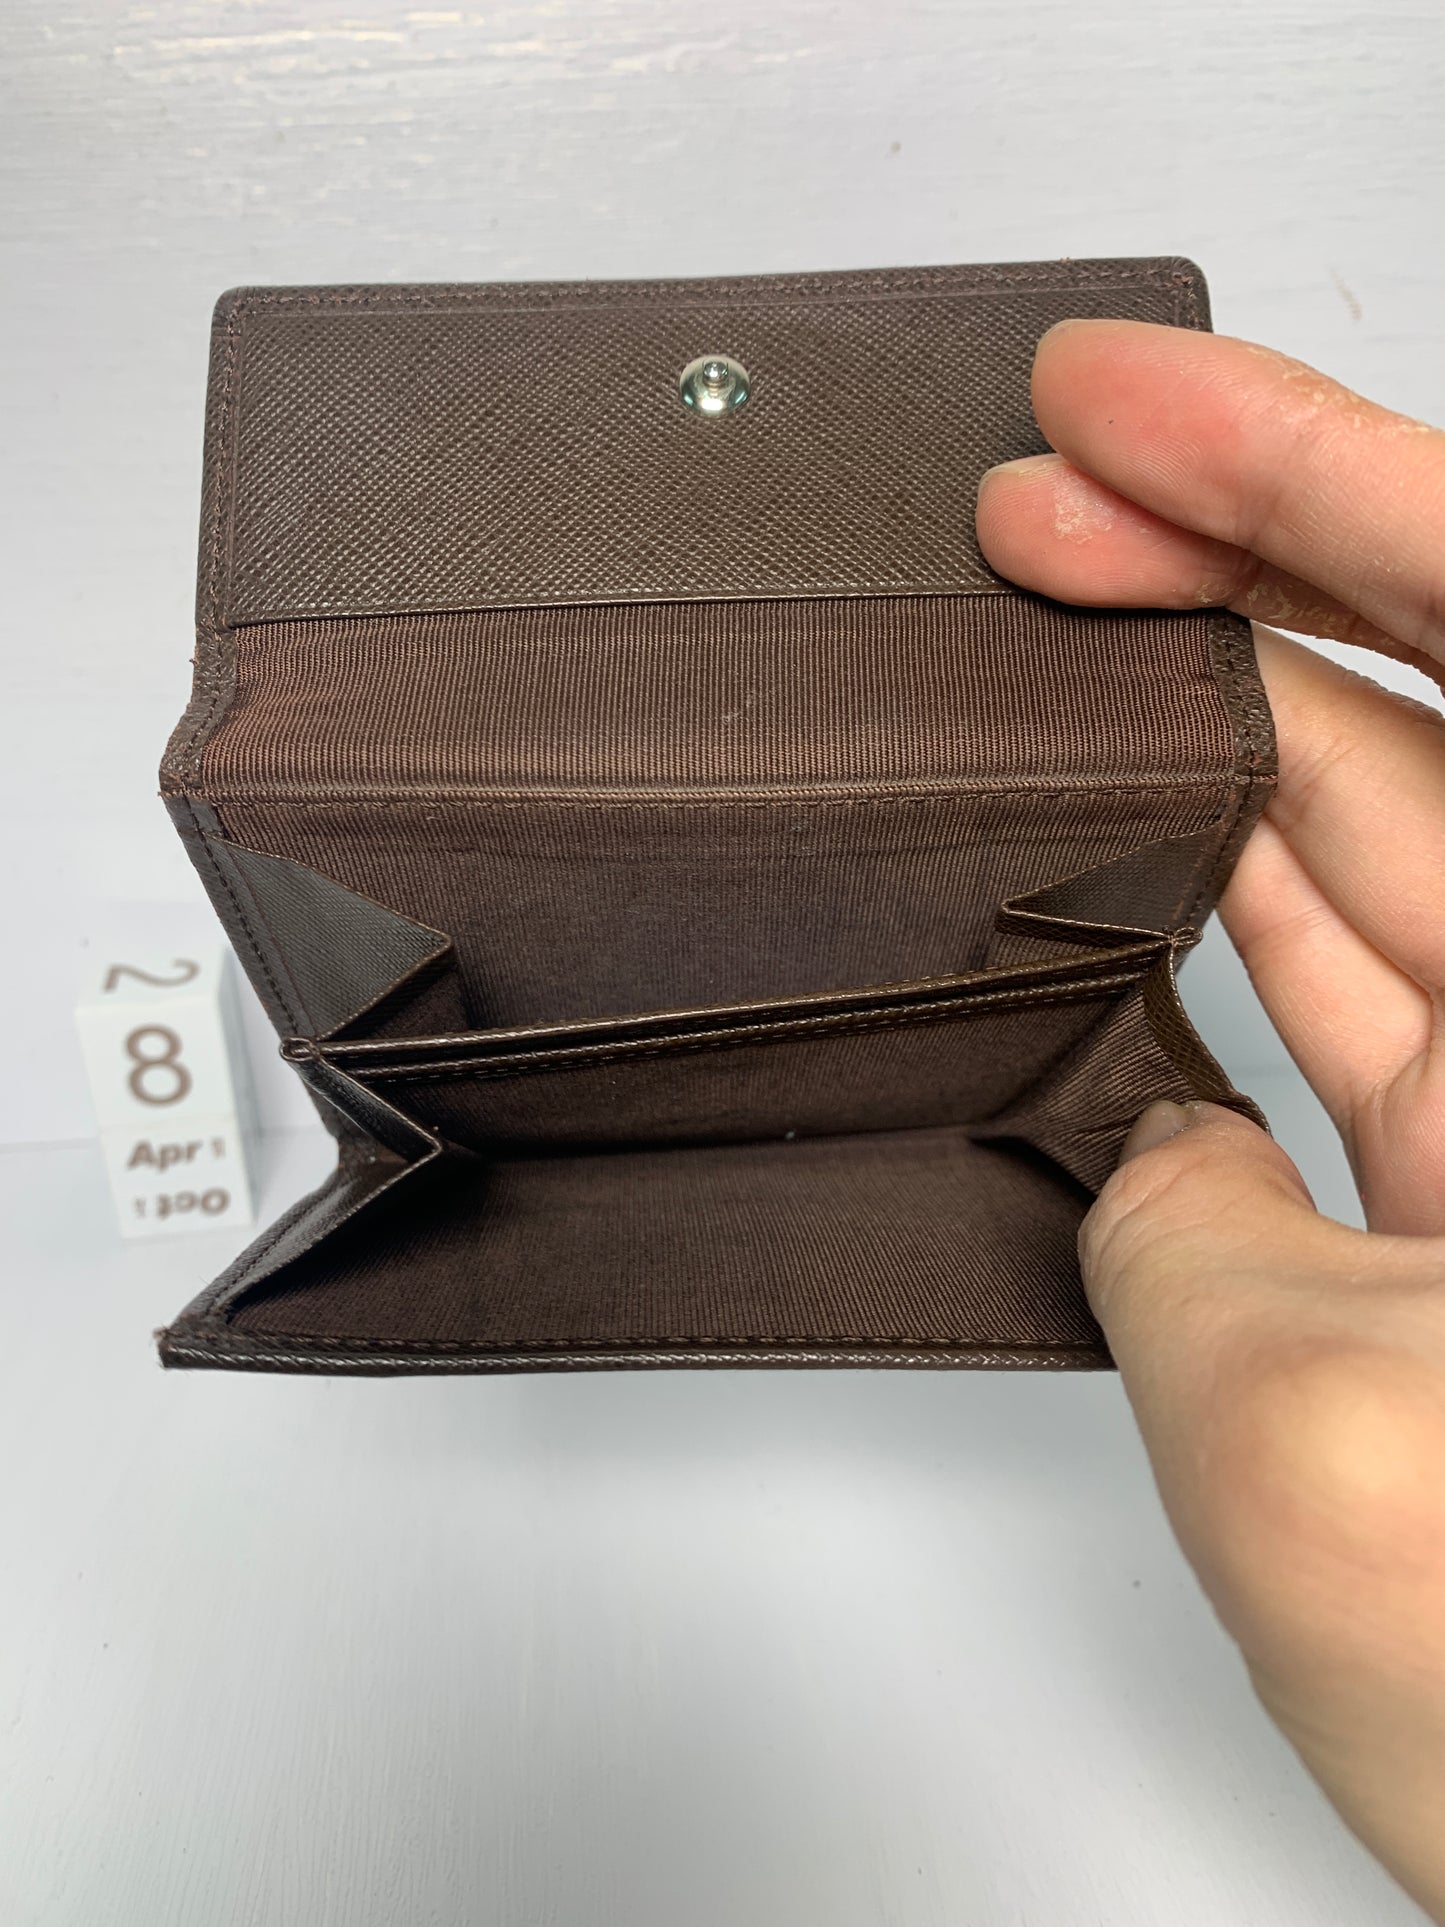 Used burrberry coins bag long wallet   - 8APR